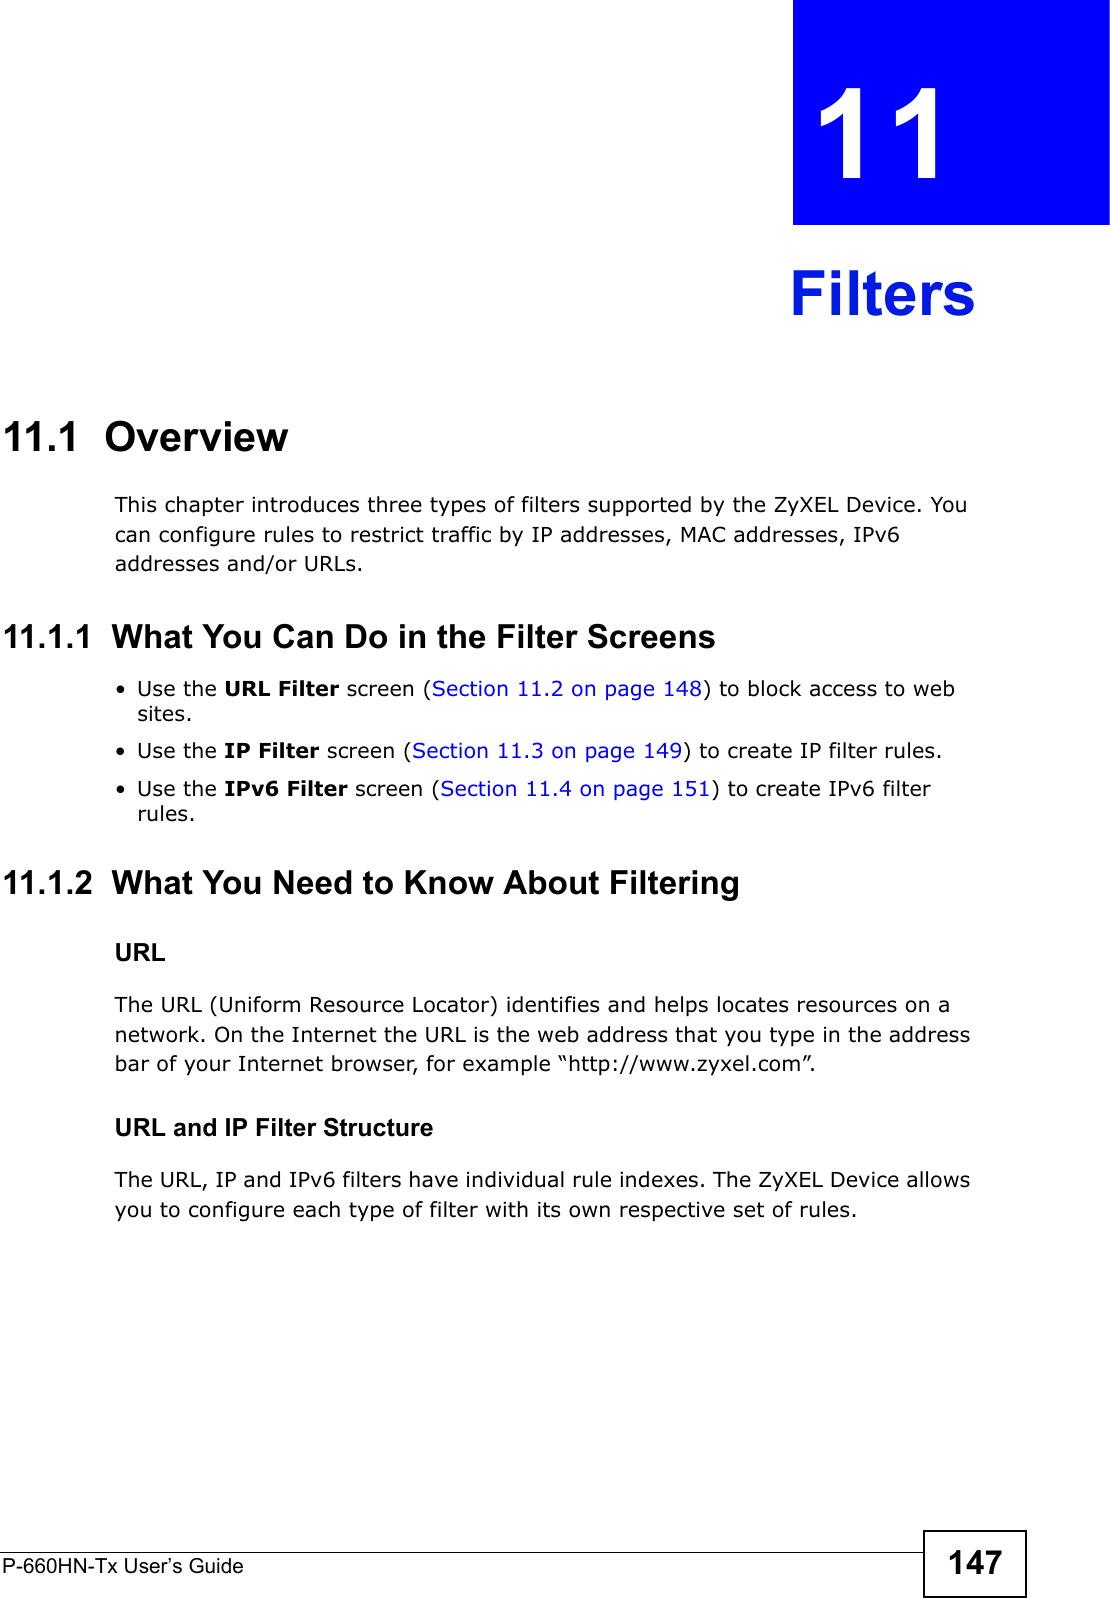 P-660HN-Tx User’s Guide 147CHAPTER  11 Filters11.1  Overview This chapter introduces three types of filters supported by the ZyXEL Device. You can configure rules to restrict traffic by IP addresses, MAC addresses, IPv6 addresses and/or URLs.11.1.1  What You Can Do in the Filter Screens•Use the URL Filter screen (Section 11.2 on page 148) to block access to web sites.•Use the IP Filter screen (Section 11.3 on page 149) to create IP filter rules.•Use the IPv6 Filter screen (Section 11.4 on page 151) to create IPv6 filter rules.11.1.2  What You Need to Know About FilteringURLThe URL (Uniform Resource Locator) identifies and helps locates resources on a network. On the Internet the URL is the web address that you type in the address bar of your Internet browser, for example “http://www.zyxel.com”.URL and IP Filter StructureThe URL, IP and IPv6 filters have individual rule indexes. The ZyXEL Device allows you to configure each type of filter with its own respective set of rules. 